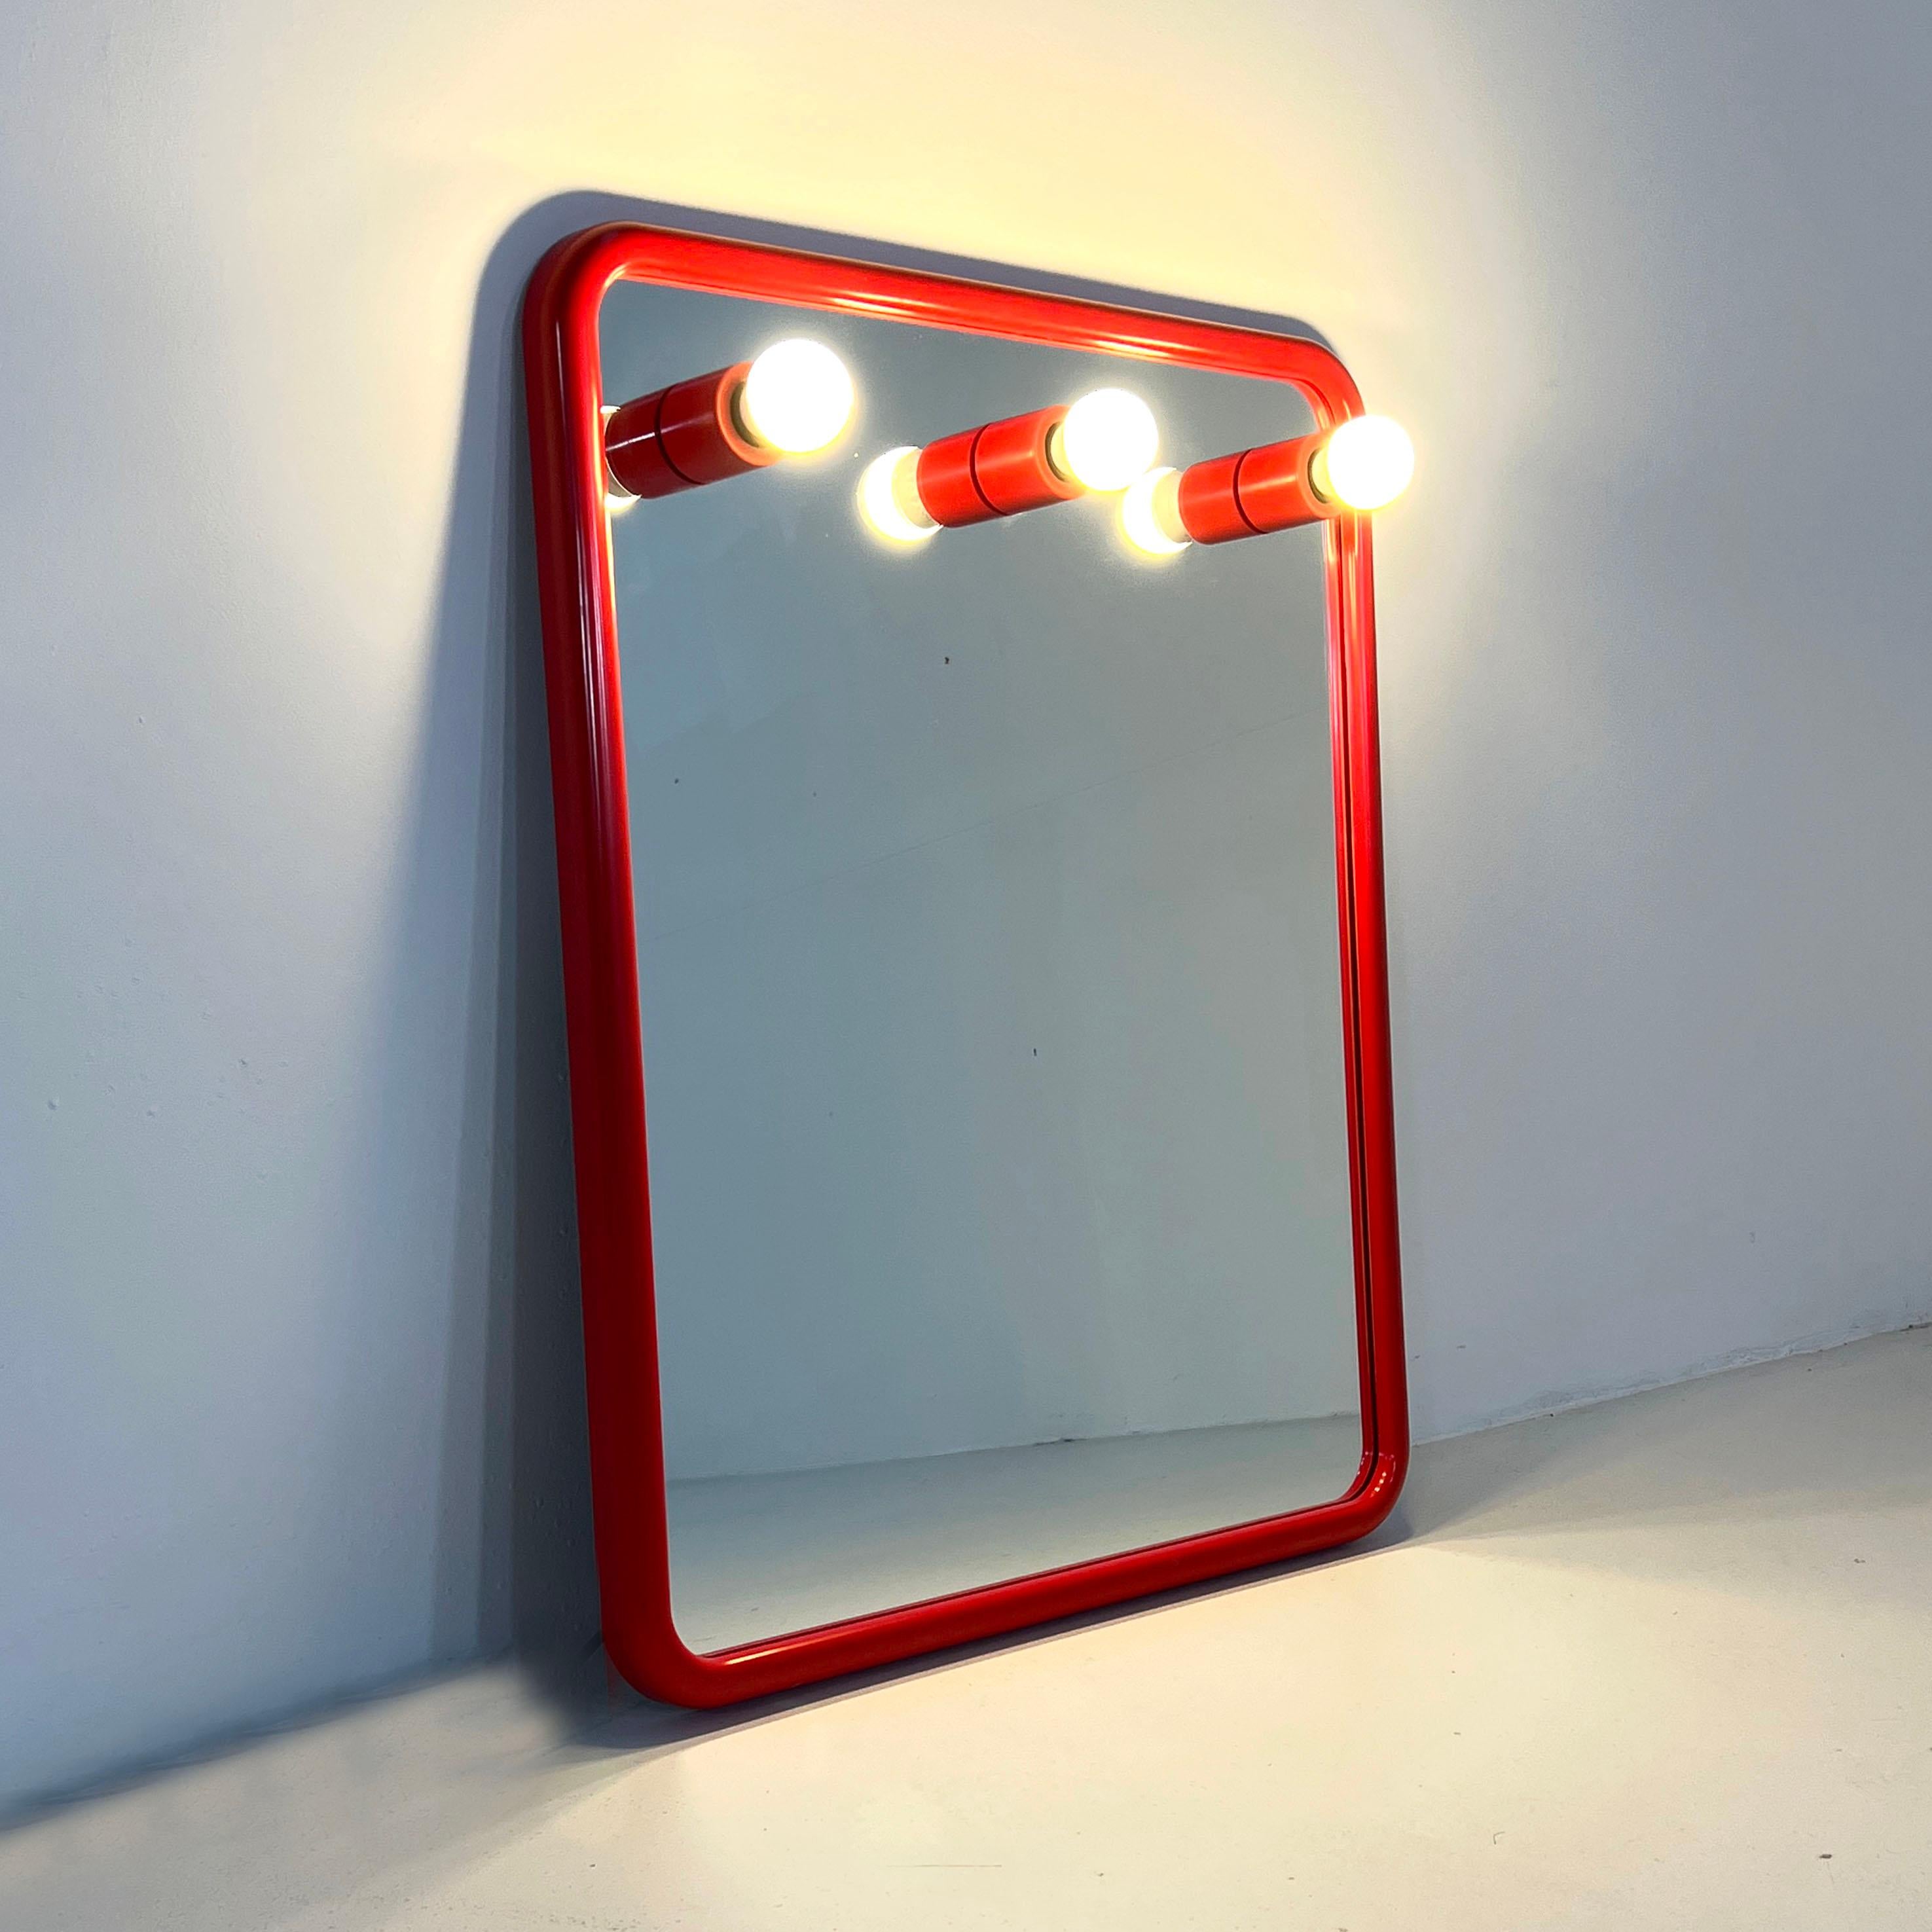 Producer - Gedy
Design Period - Seventies
Measurements - width 58 cm x depth 10 cm x height 64 cm 
Materials - Plastic
Color - Red

Condition - Good 
Comments - Light wear consistent with age and use. Some light scuffs.